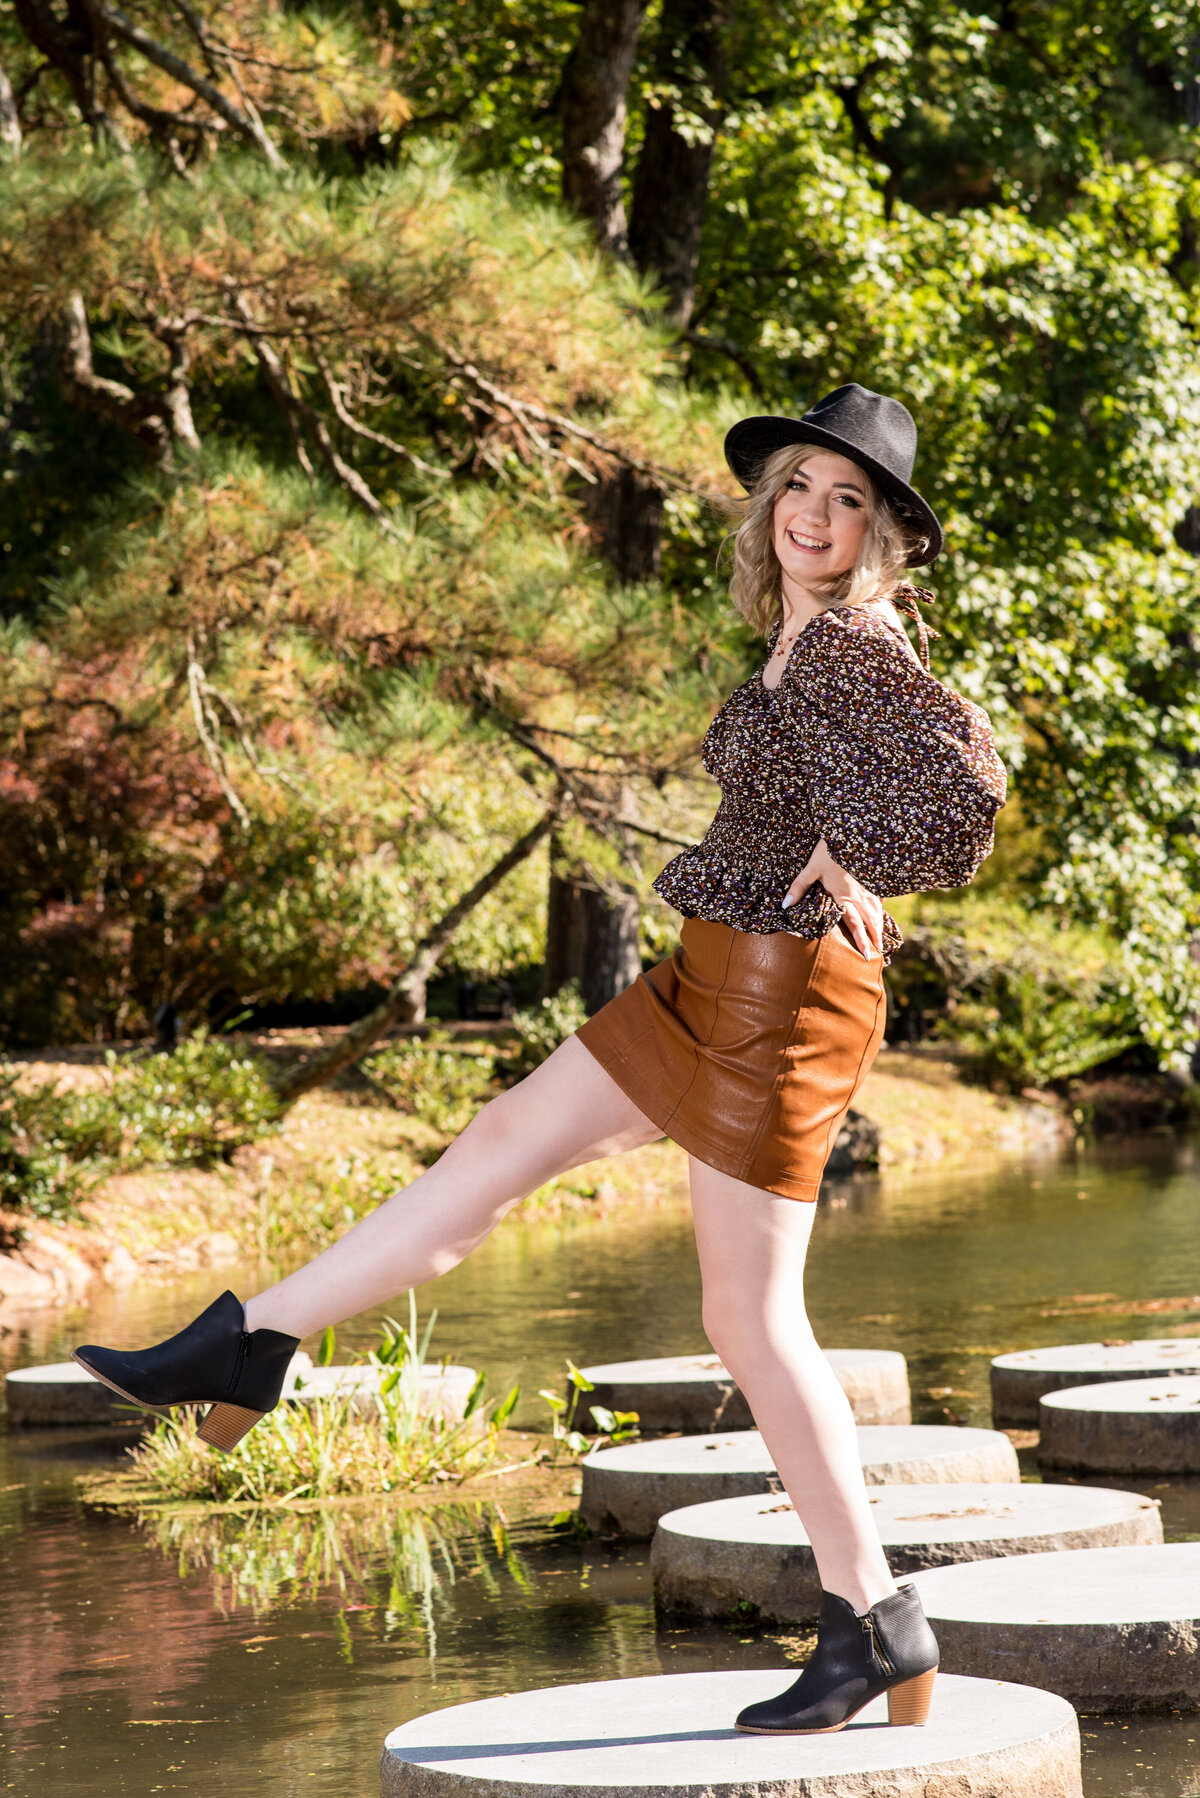 Warsaw high school senior girl wearing floral top and brown leather skirt kicks out leg during Richmond senior portrait shoot at Maymond.